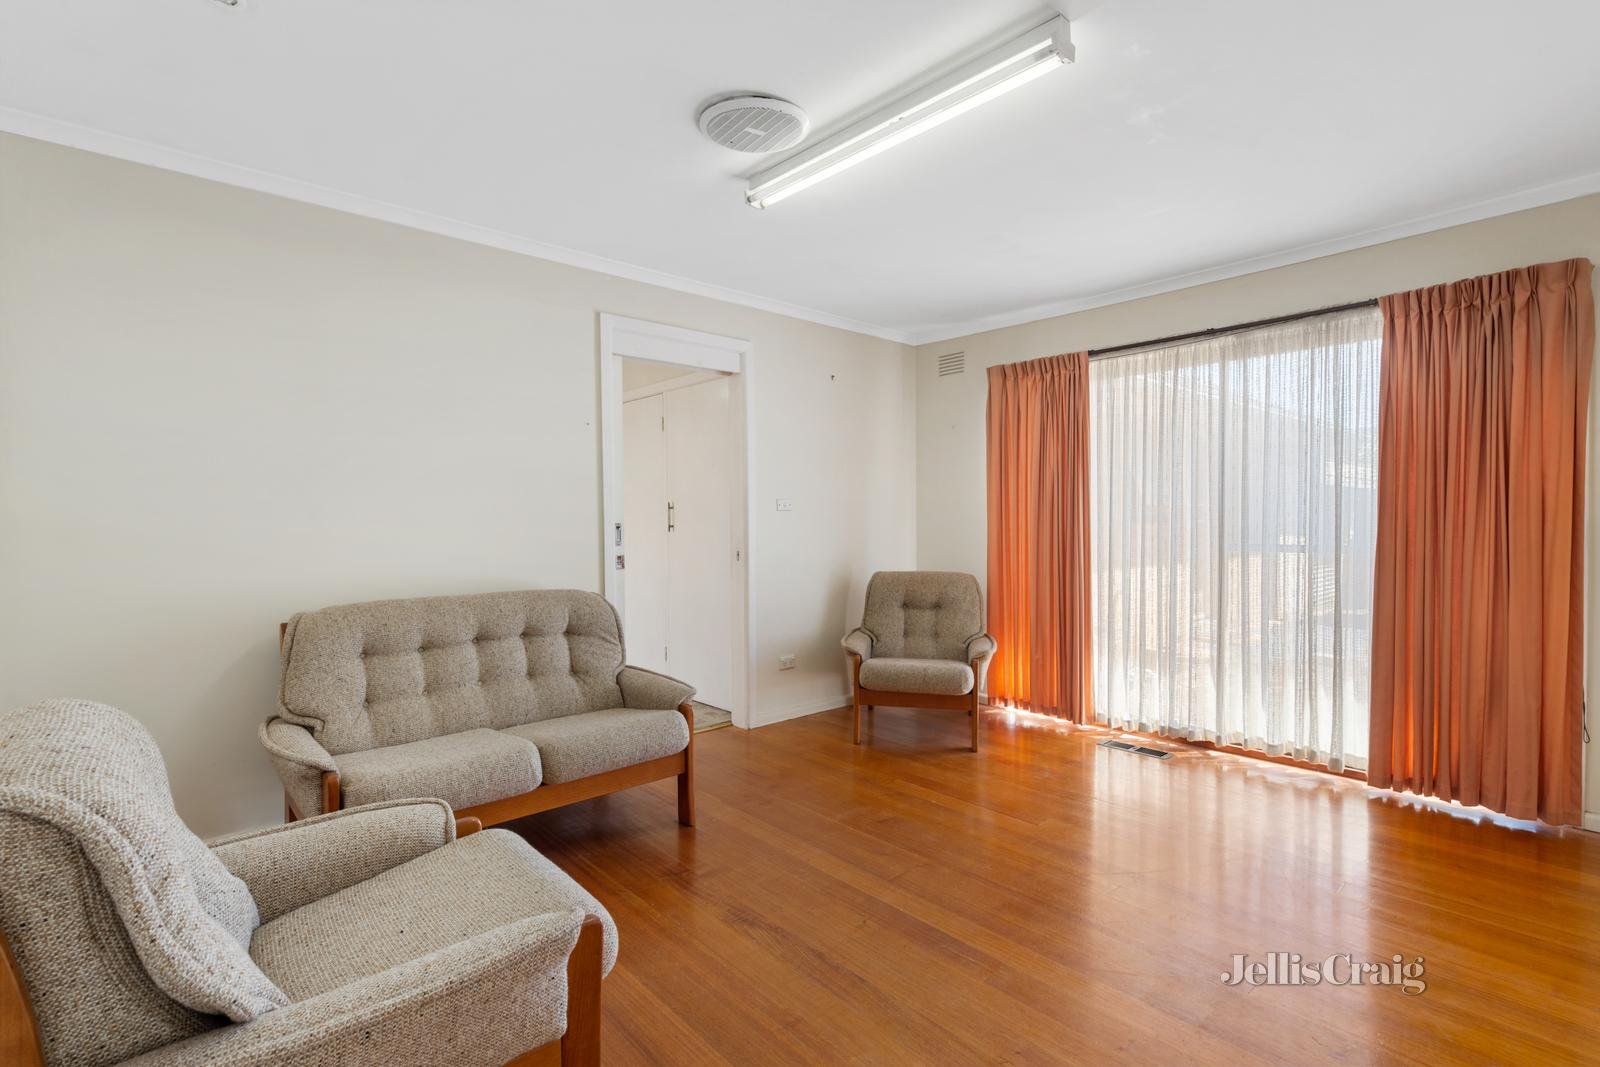 66 Wetherby Road, Doncaster image 3